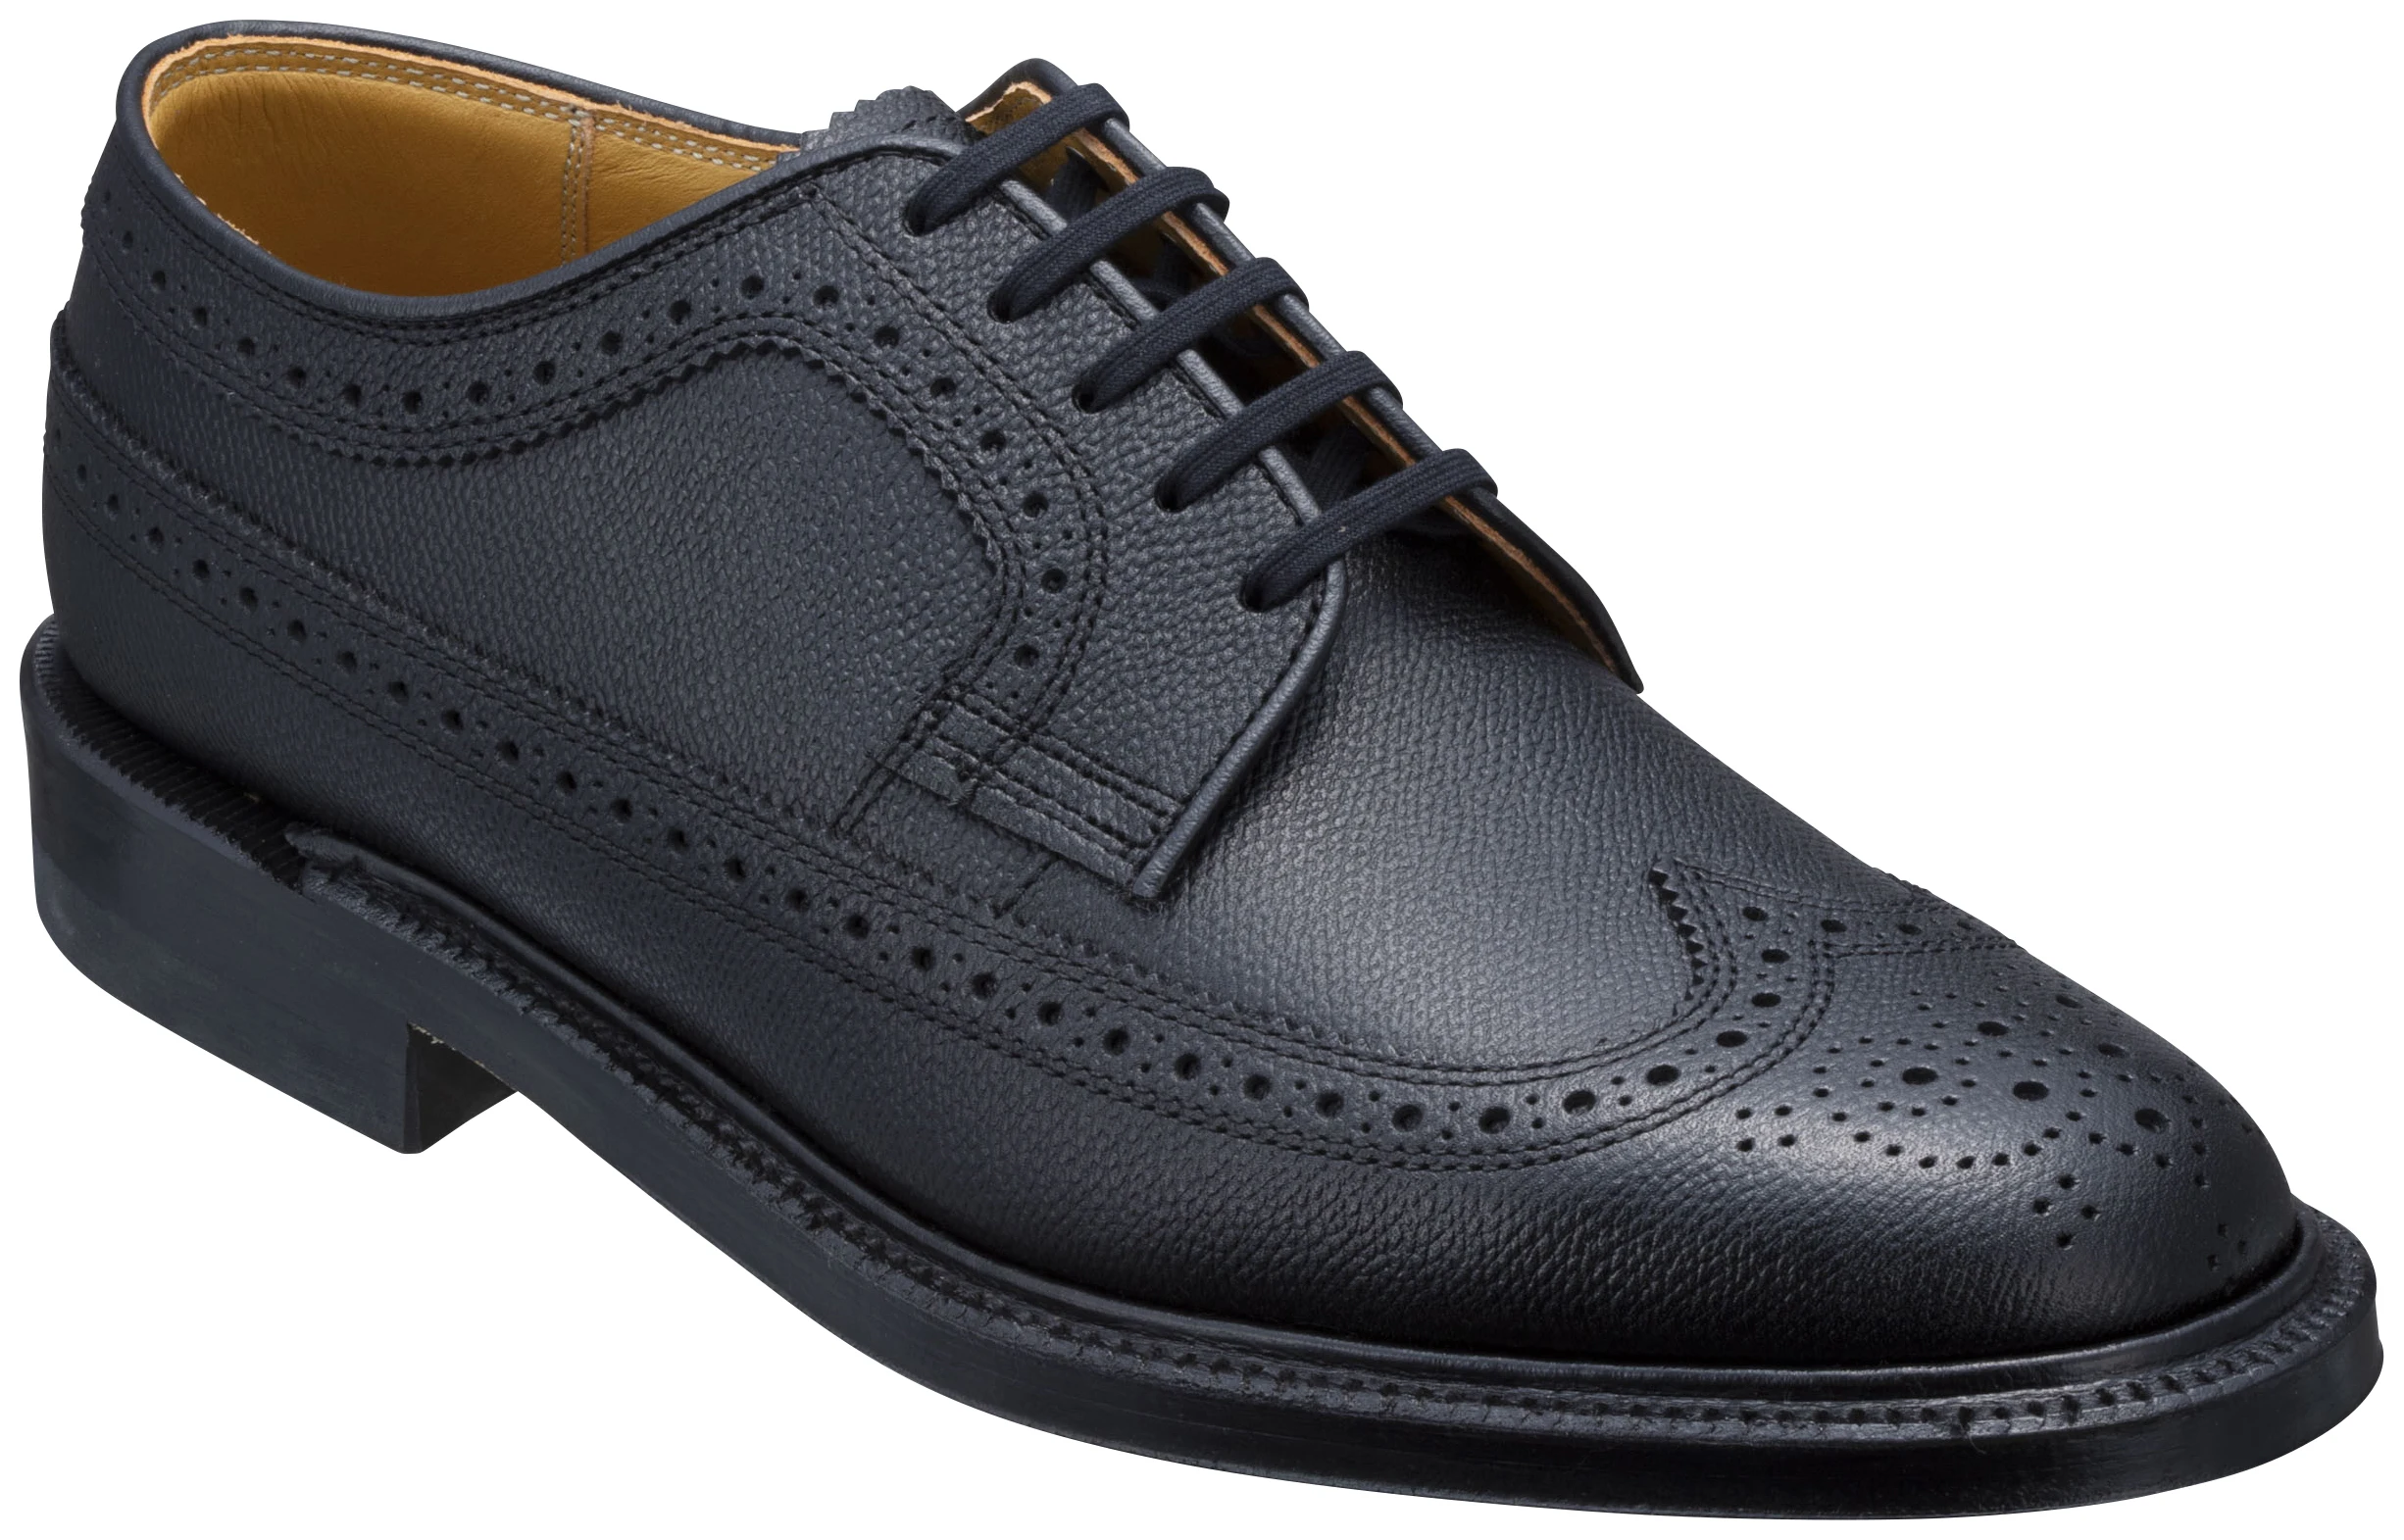 Source REGAL wingtip shoe leather male patent leather business